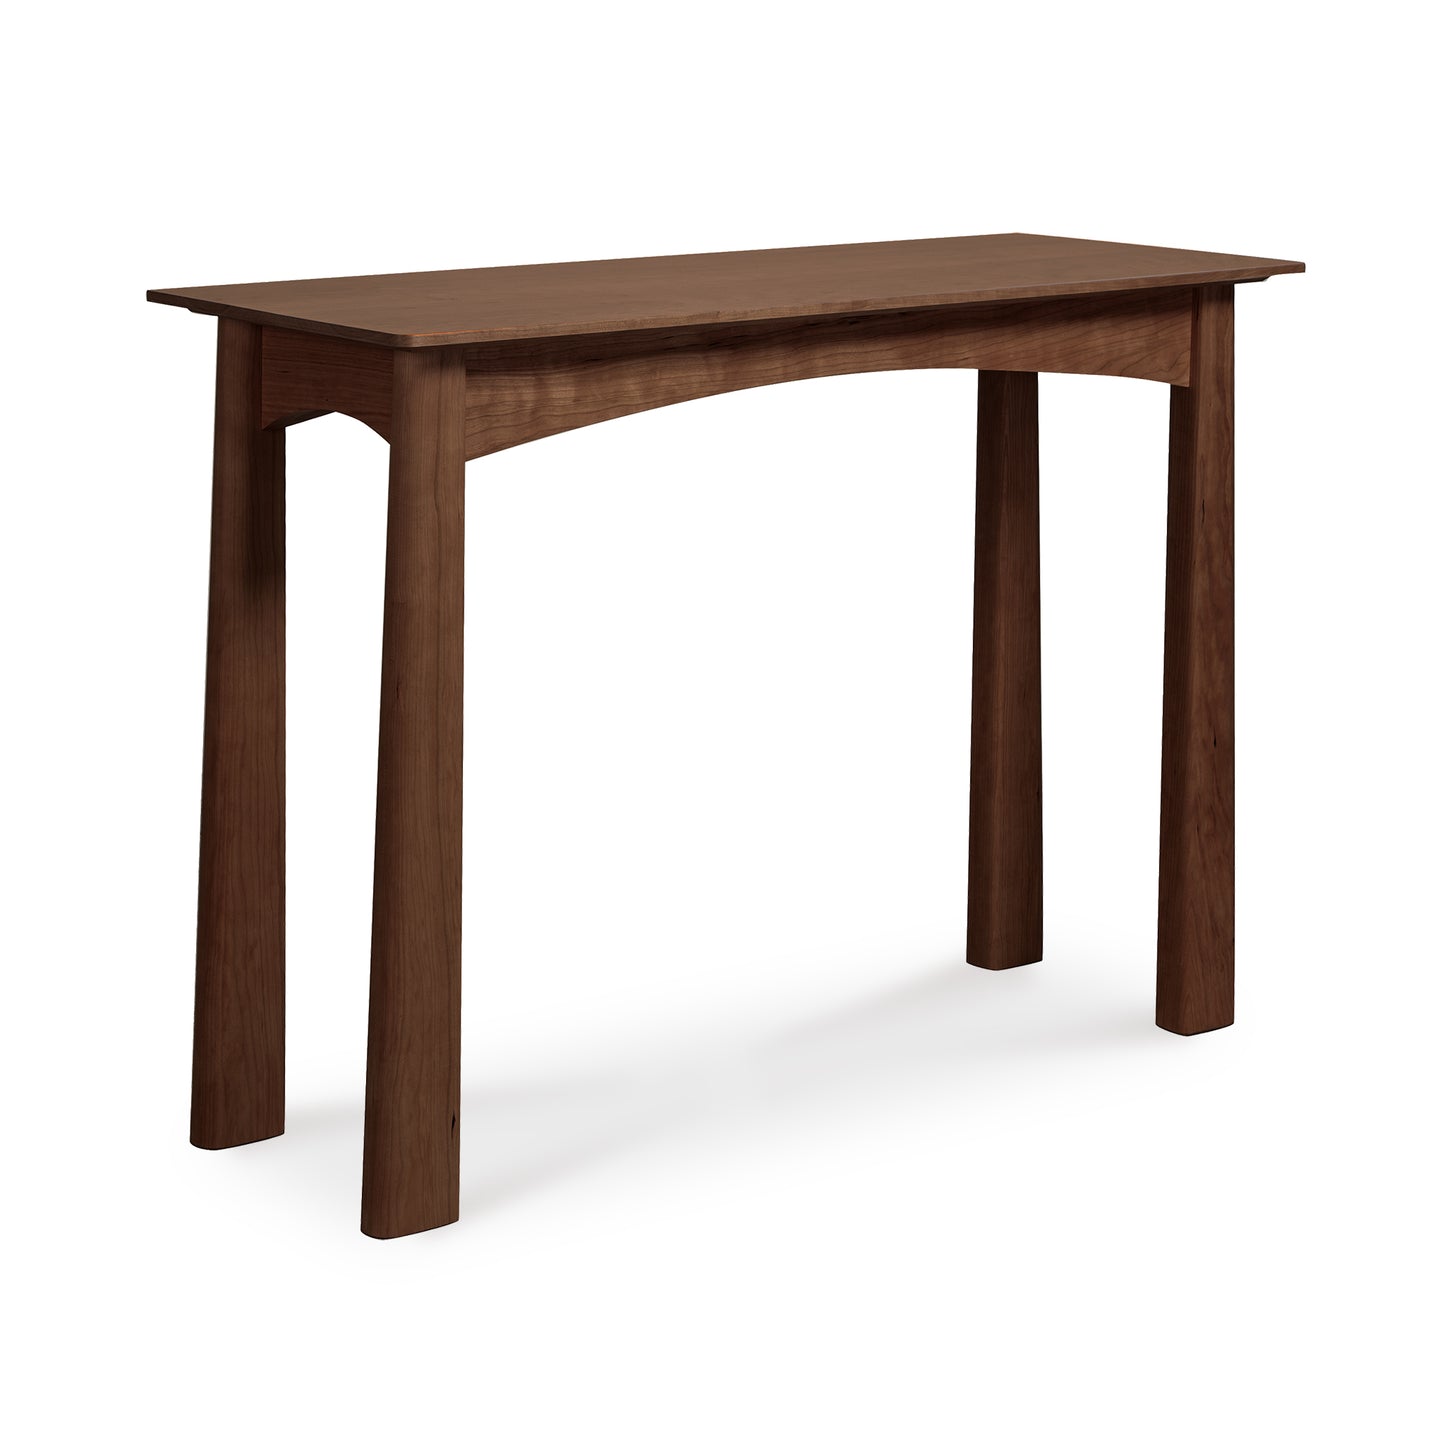 A Cherry Moon Sofa Table by Maple Corner Woodworks with a rectangular top and four sturdy legs, isolated on a white background. The table is made of dark brown wood with a smooth finish.